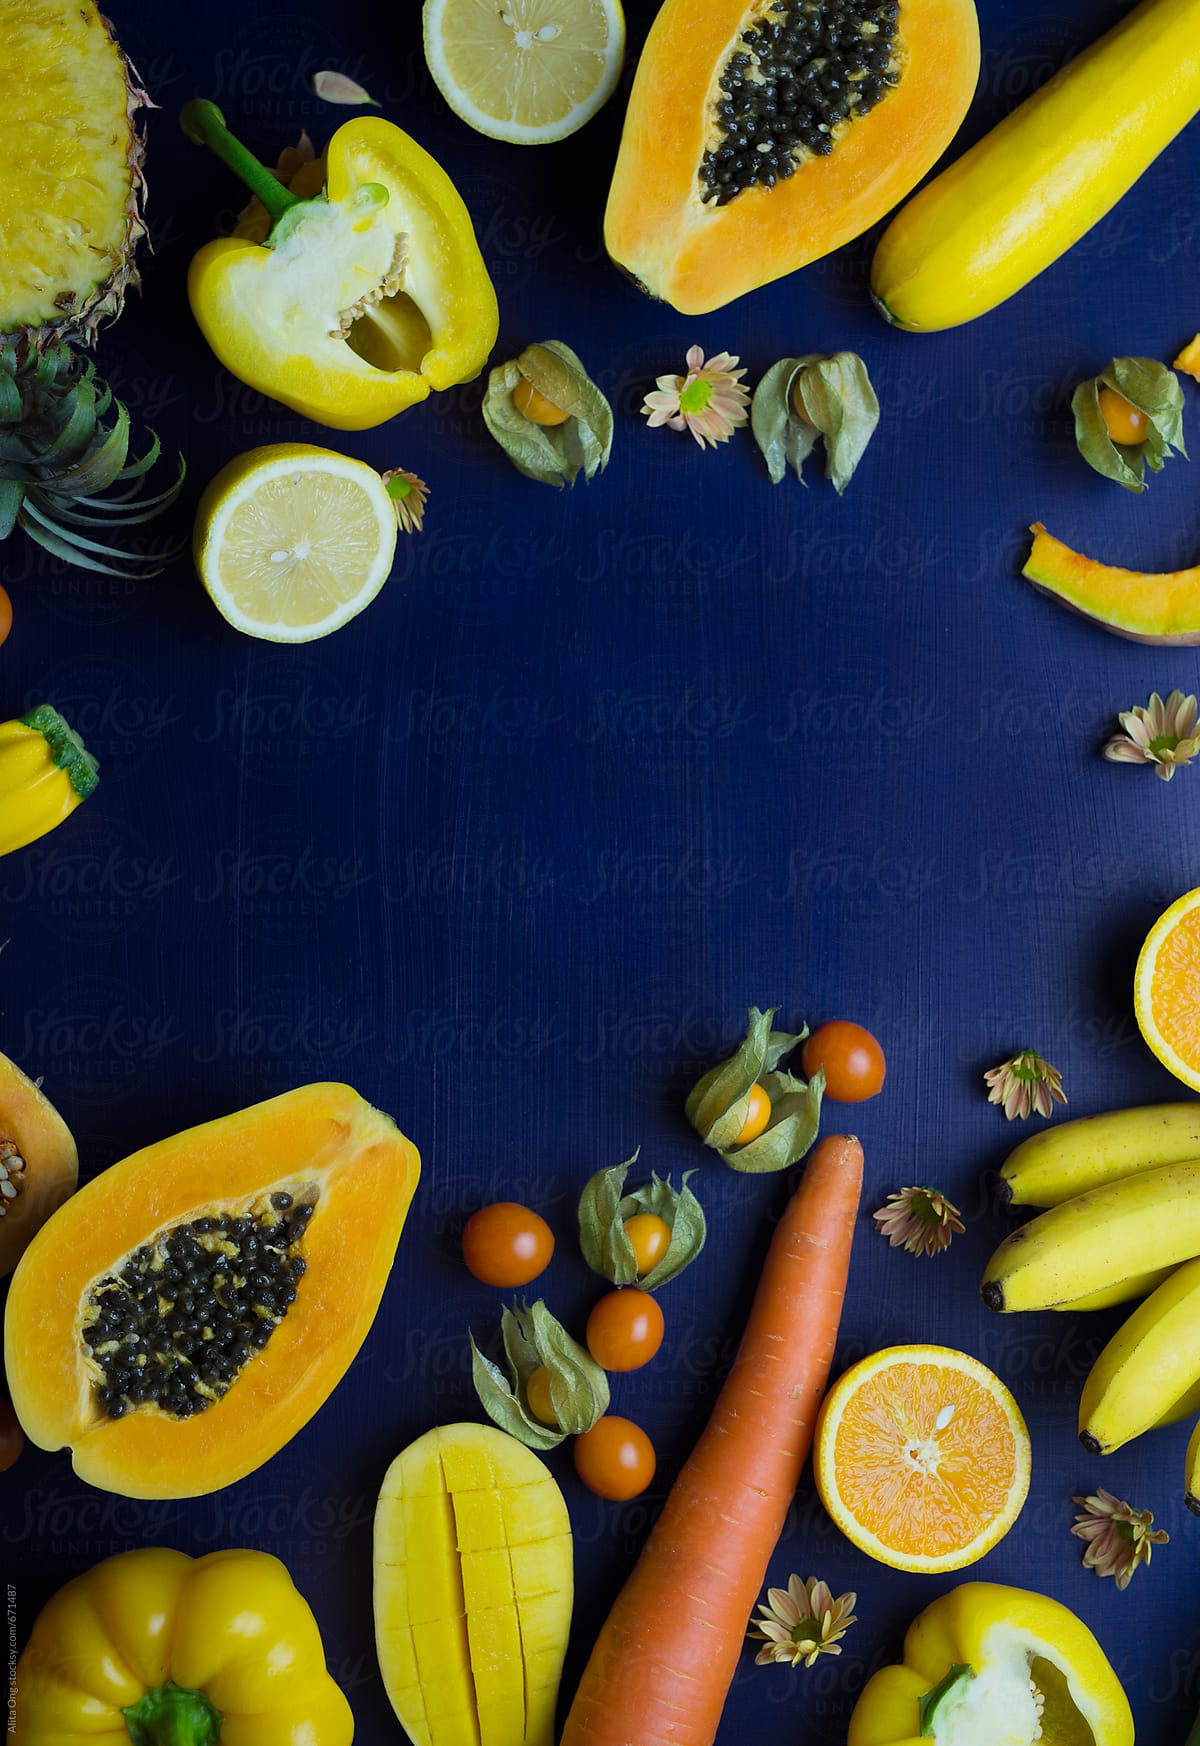 Yellow fruits and vegetables on dark blue